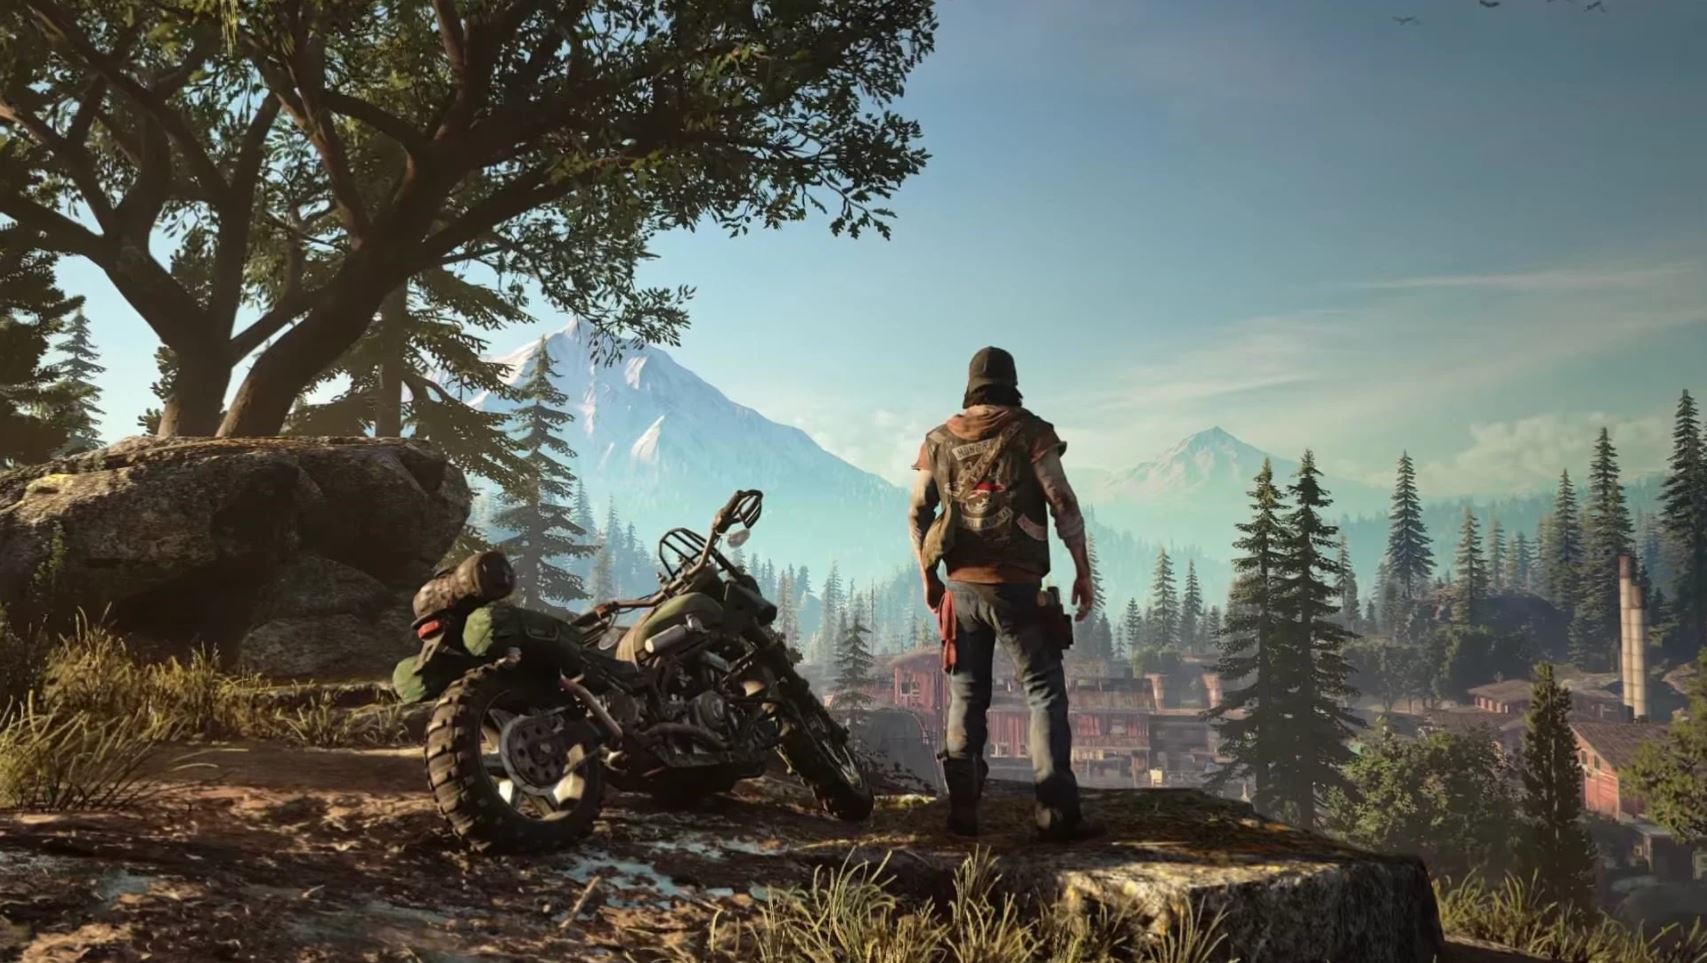 Days Gone review - a shallow copy of many better open-world action